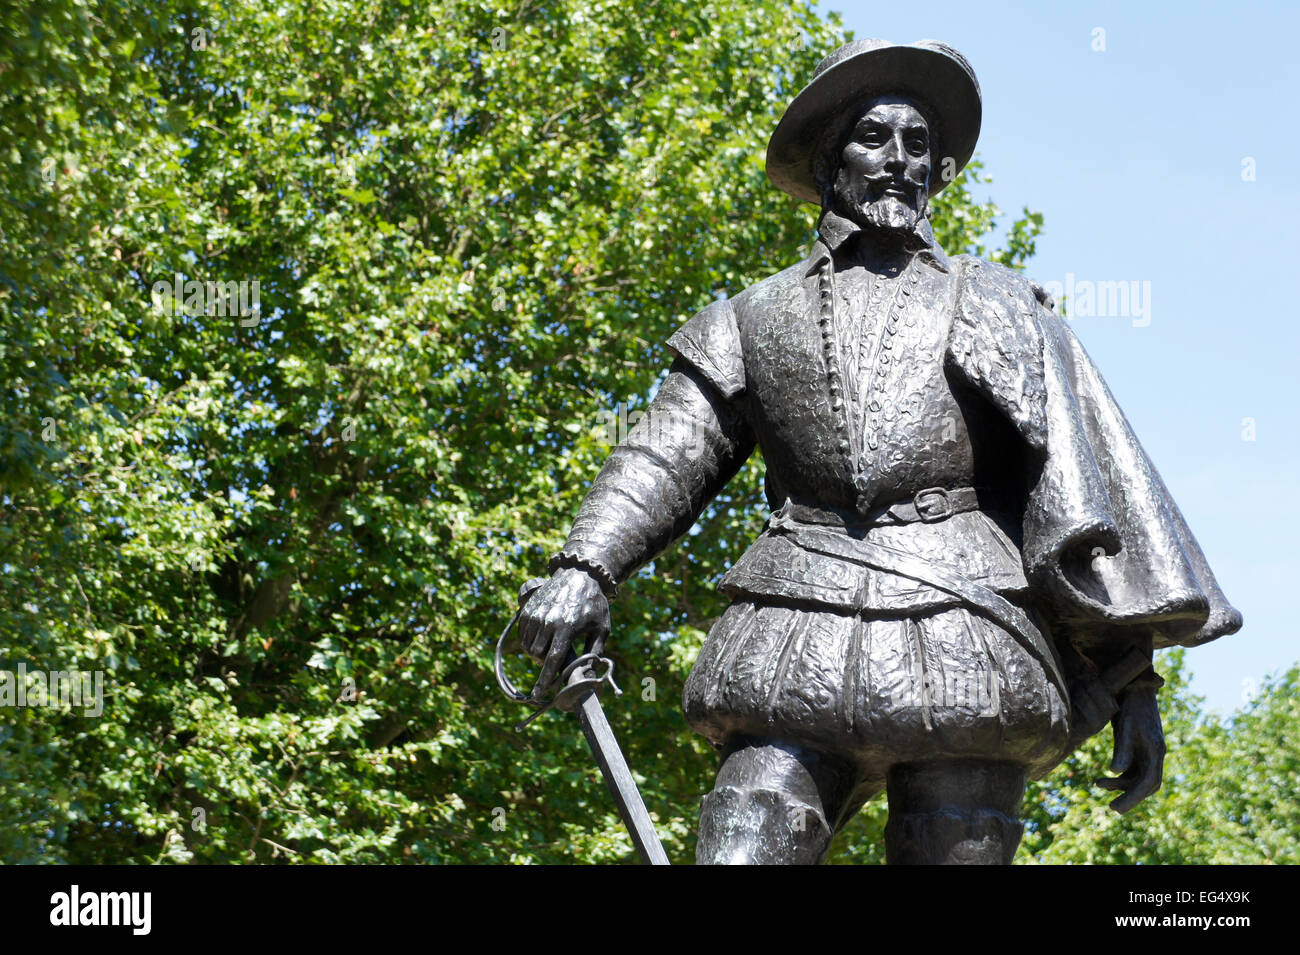 Statue of Sir Walter Raleigh in Greenwich, south-east London, England Stock Photo